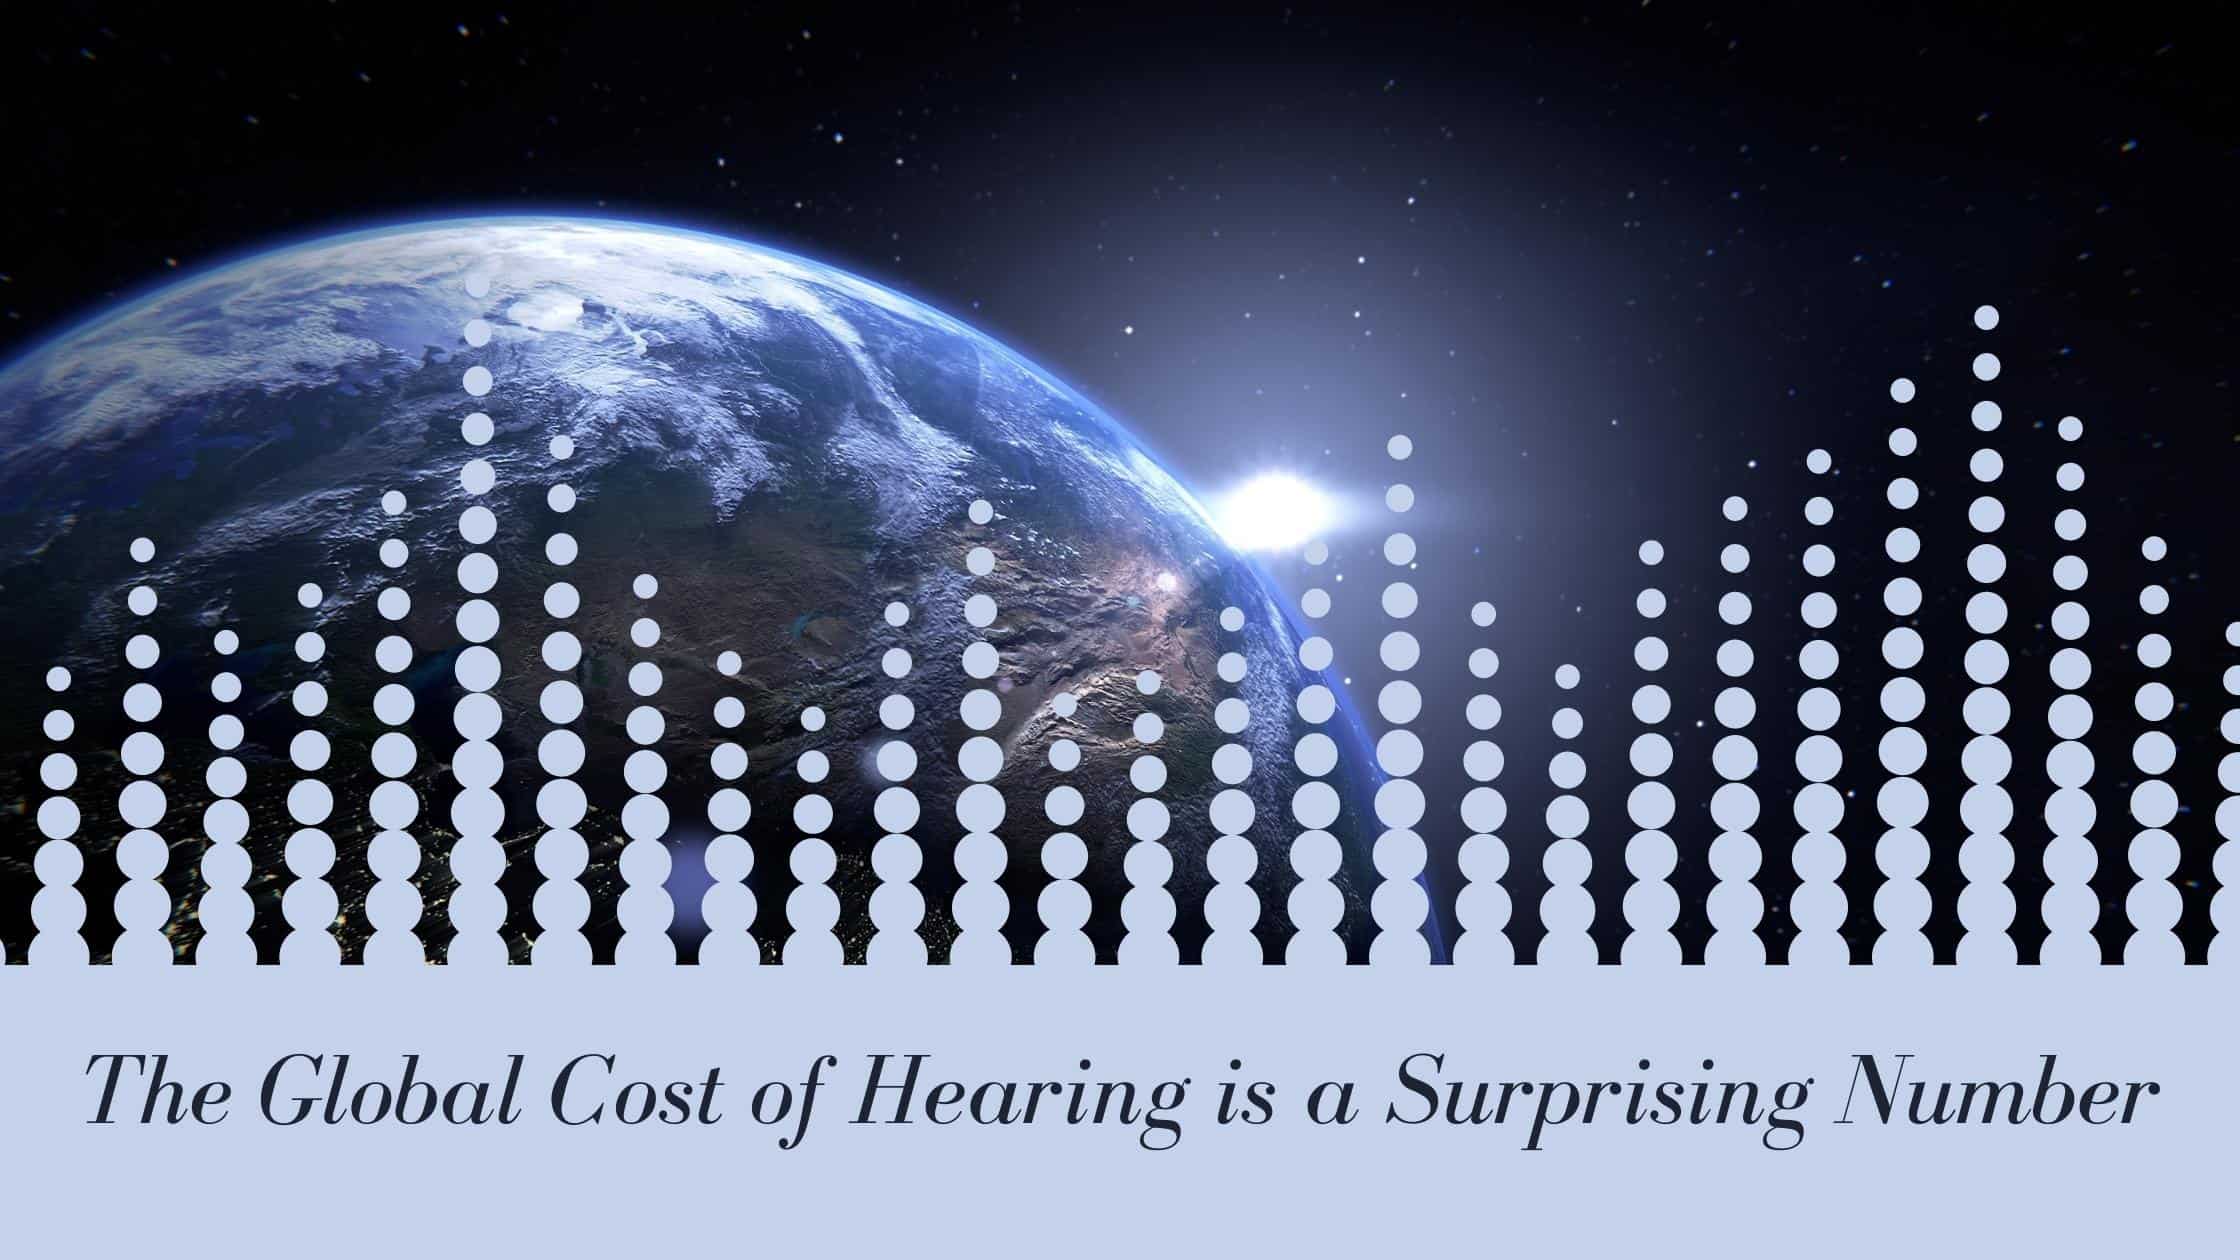 Featured image for “The Global Cost of Hearing is a Surprising Number”